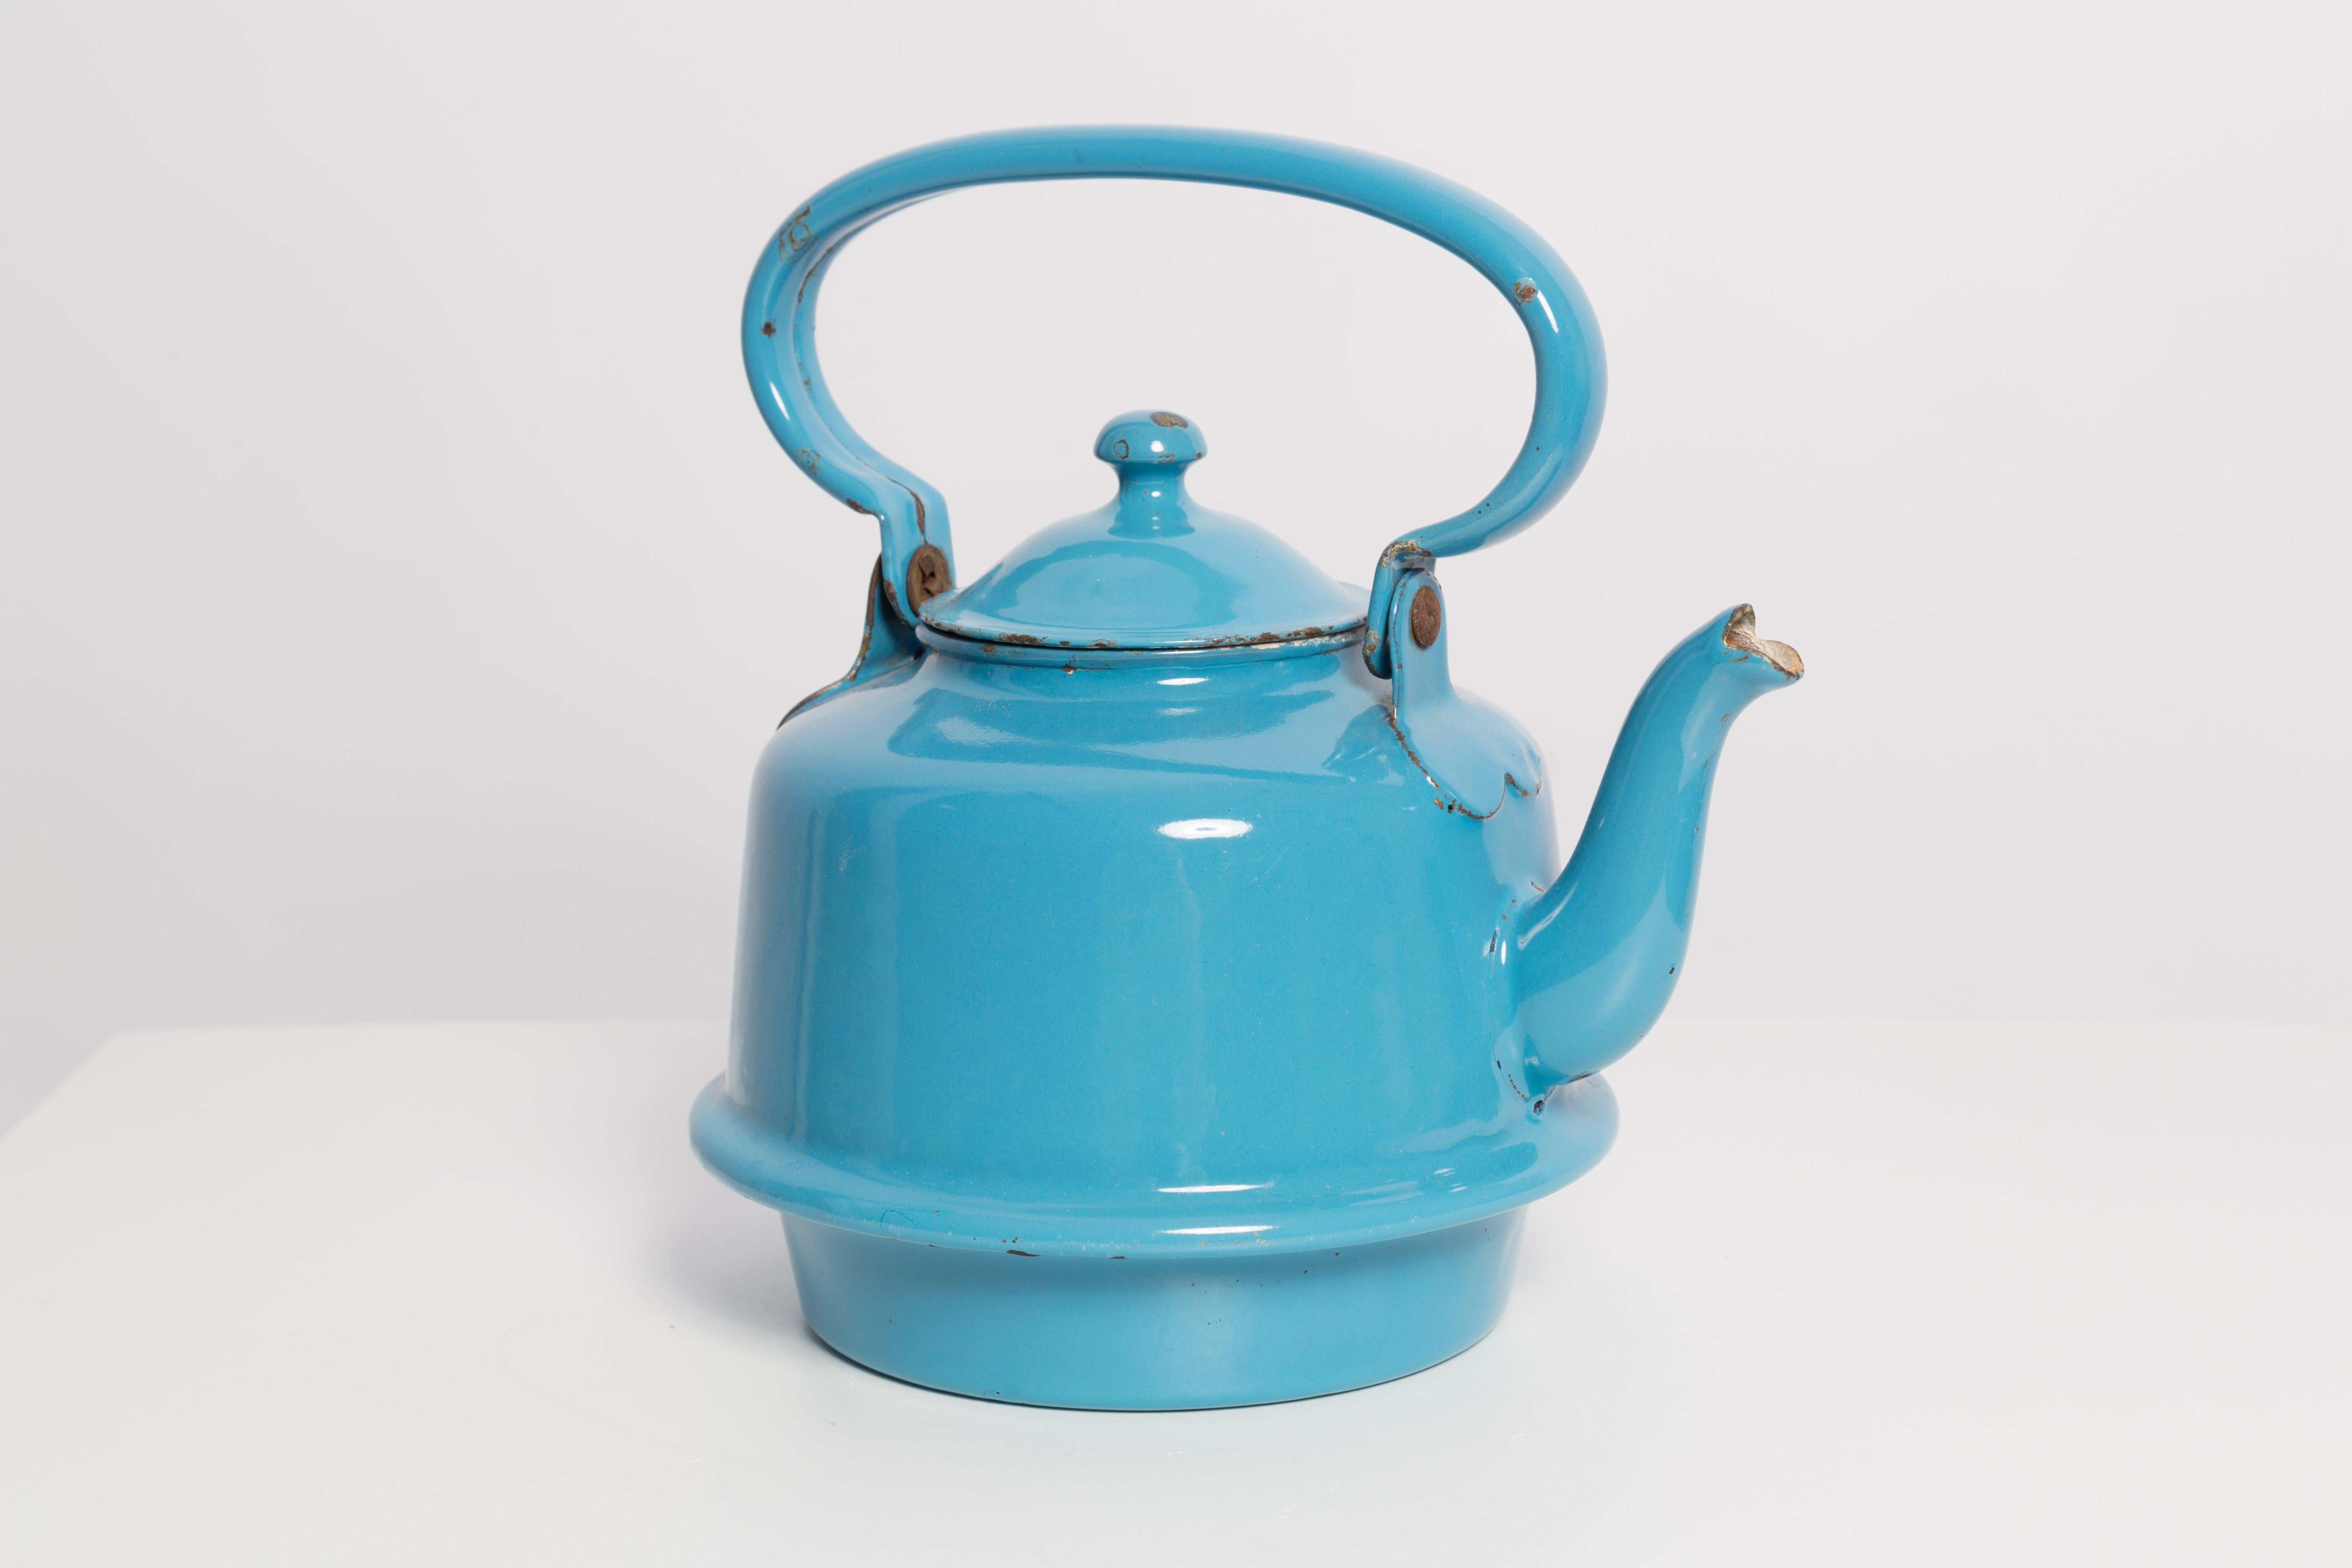 A lovely Mid-Century Modern enameled teapot / kettle from the 1960s.
Original vintage good condition. Blue enamel. Only one unique piece.